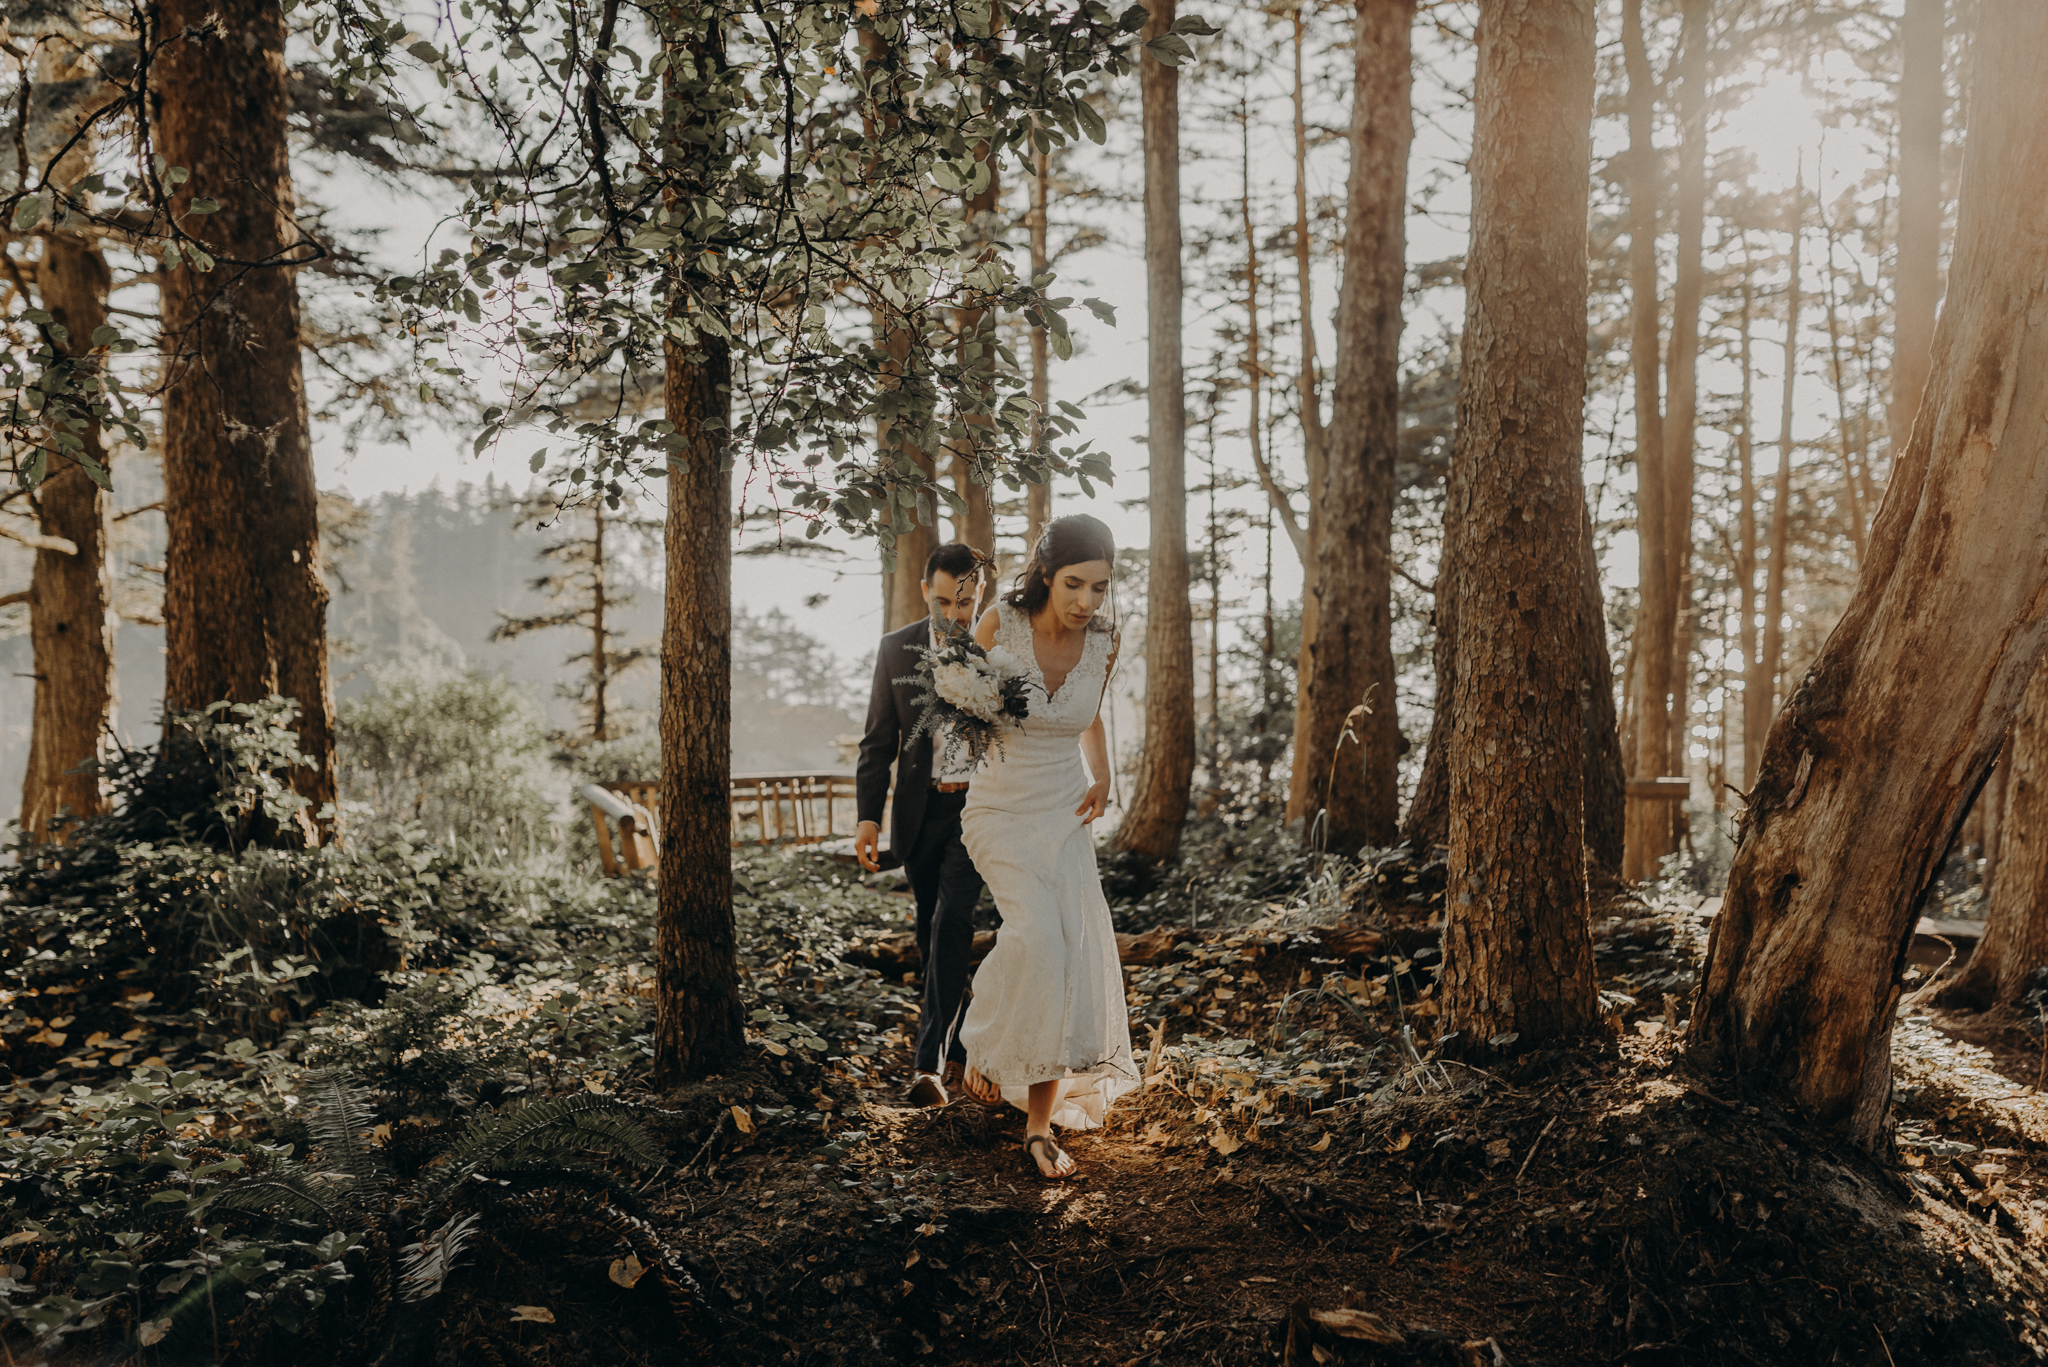 Isaiah + Taylor Photography - Cape Flattery Elopement, Olympia National Forest Wedding Photographer-110.jpg